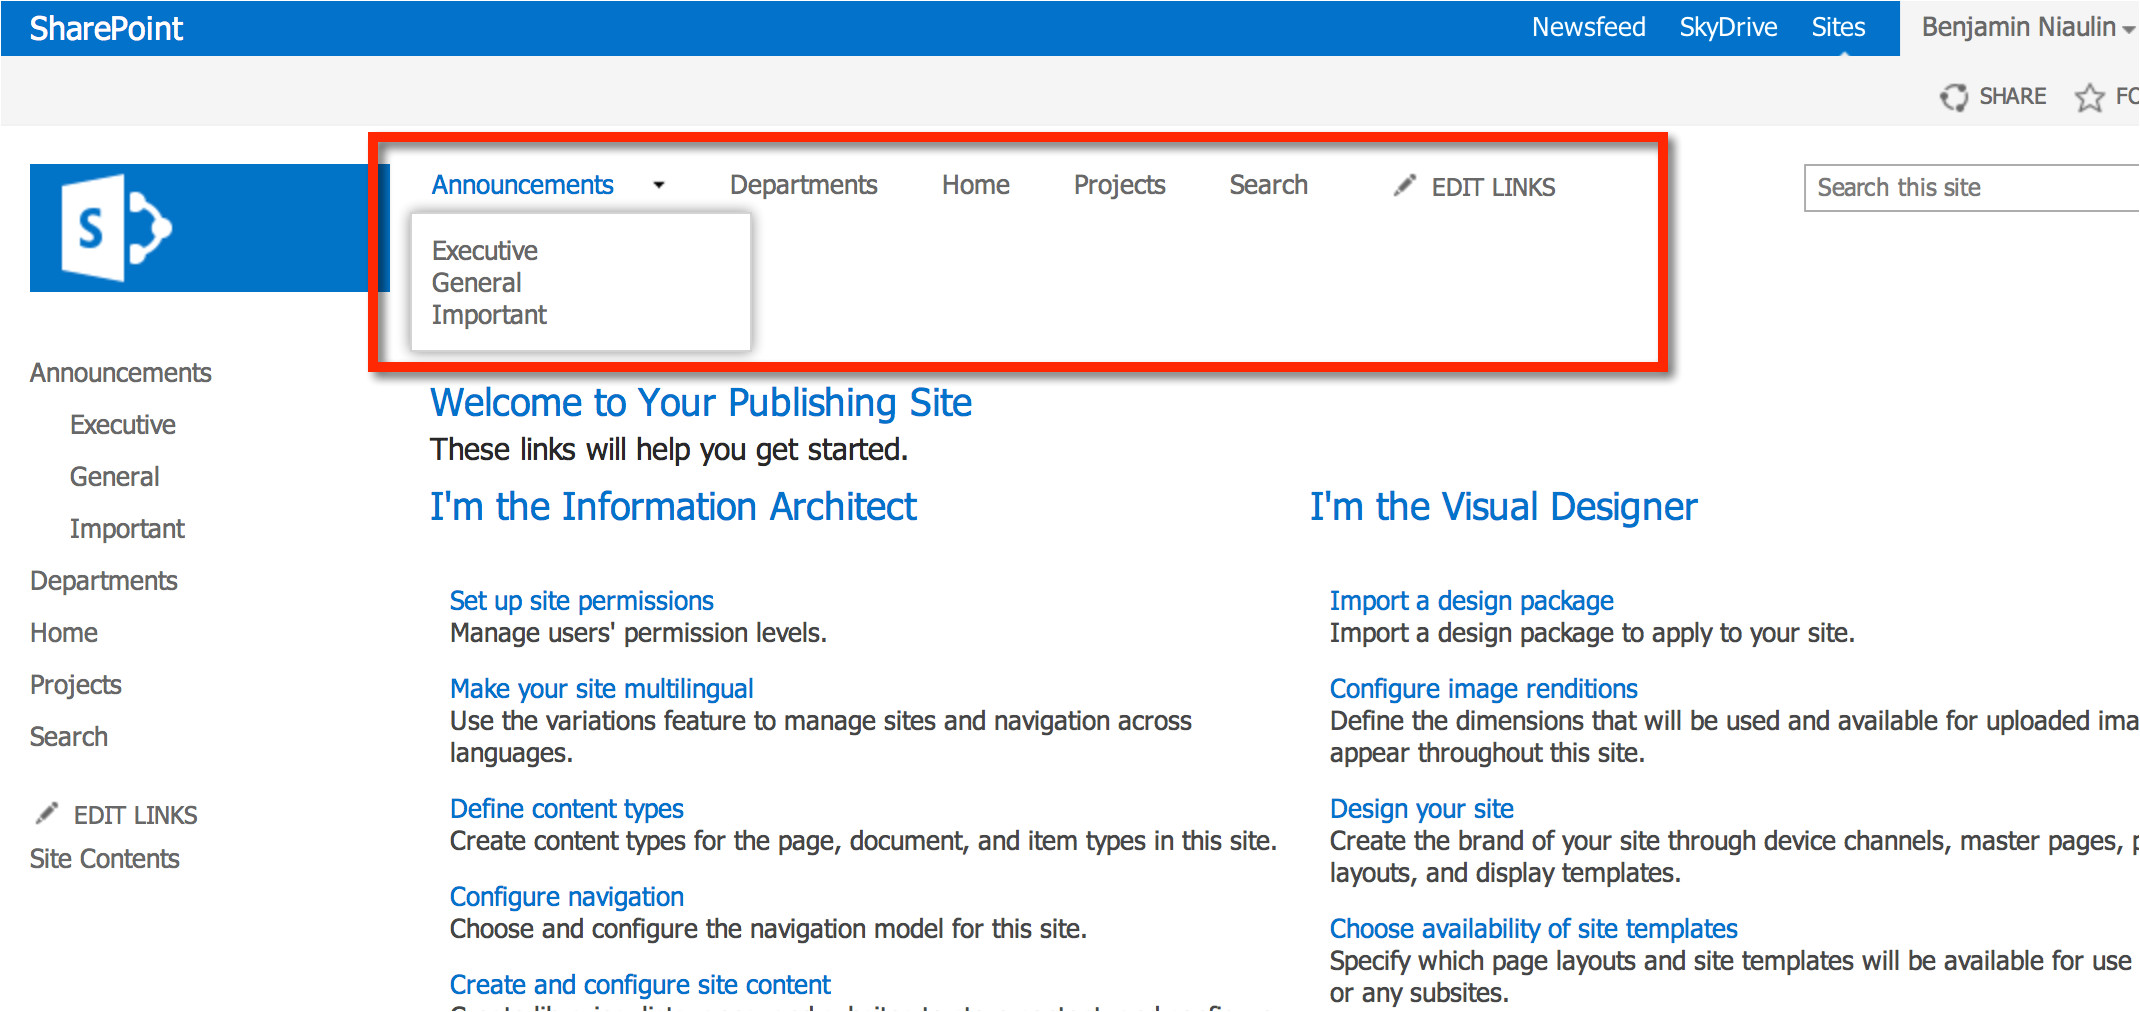 sharepoint 2013 site templates